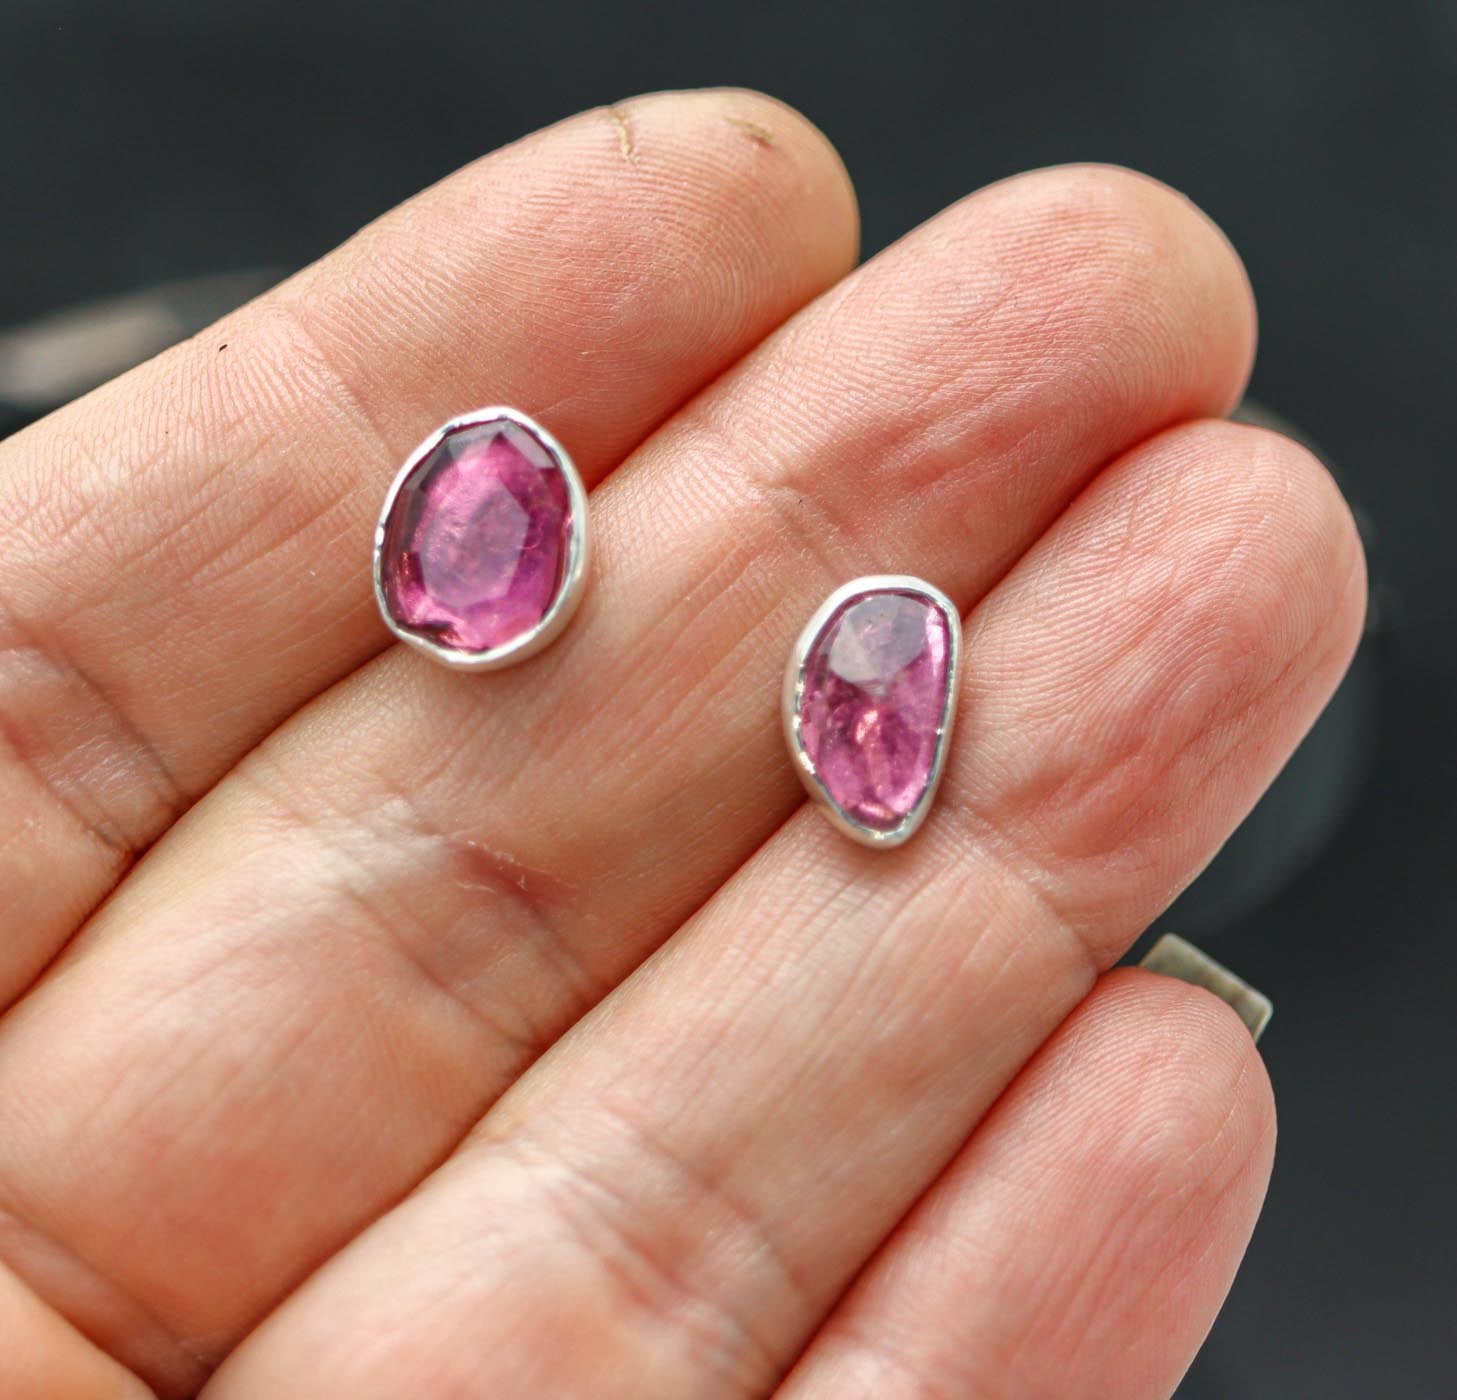 Pink Tourmaline Mismatched Stud Earrings Sterling Silver